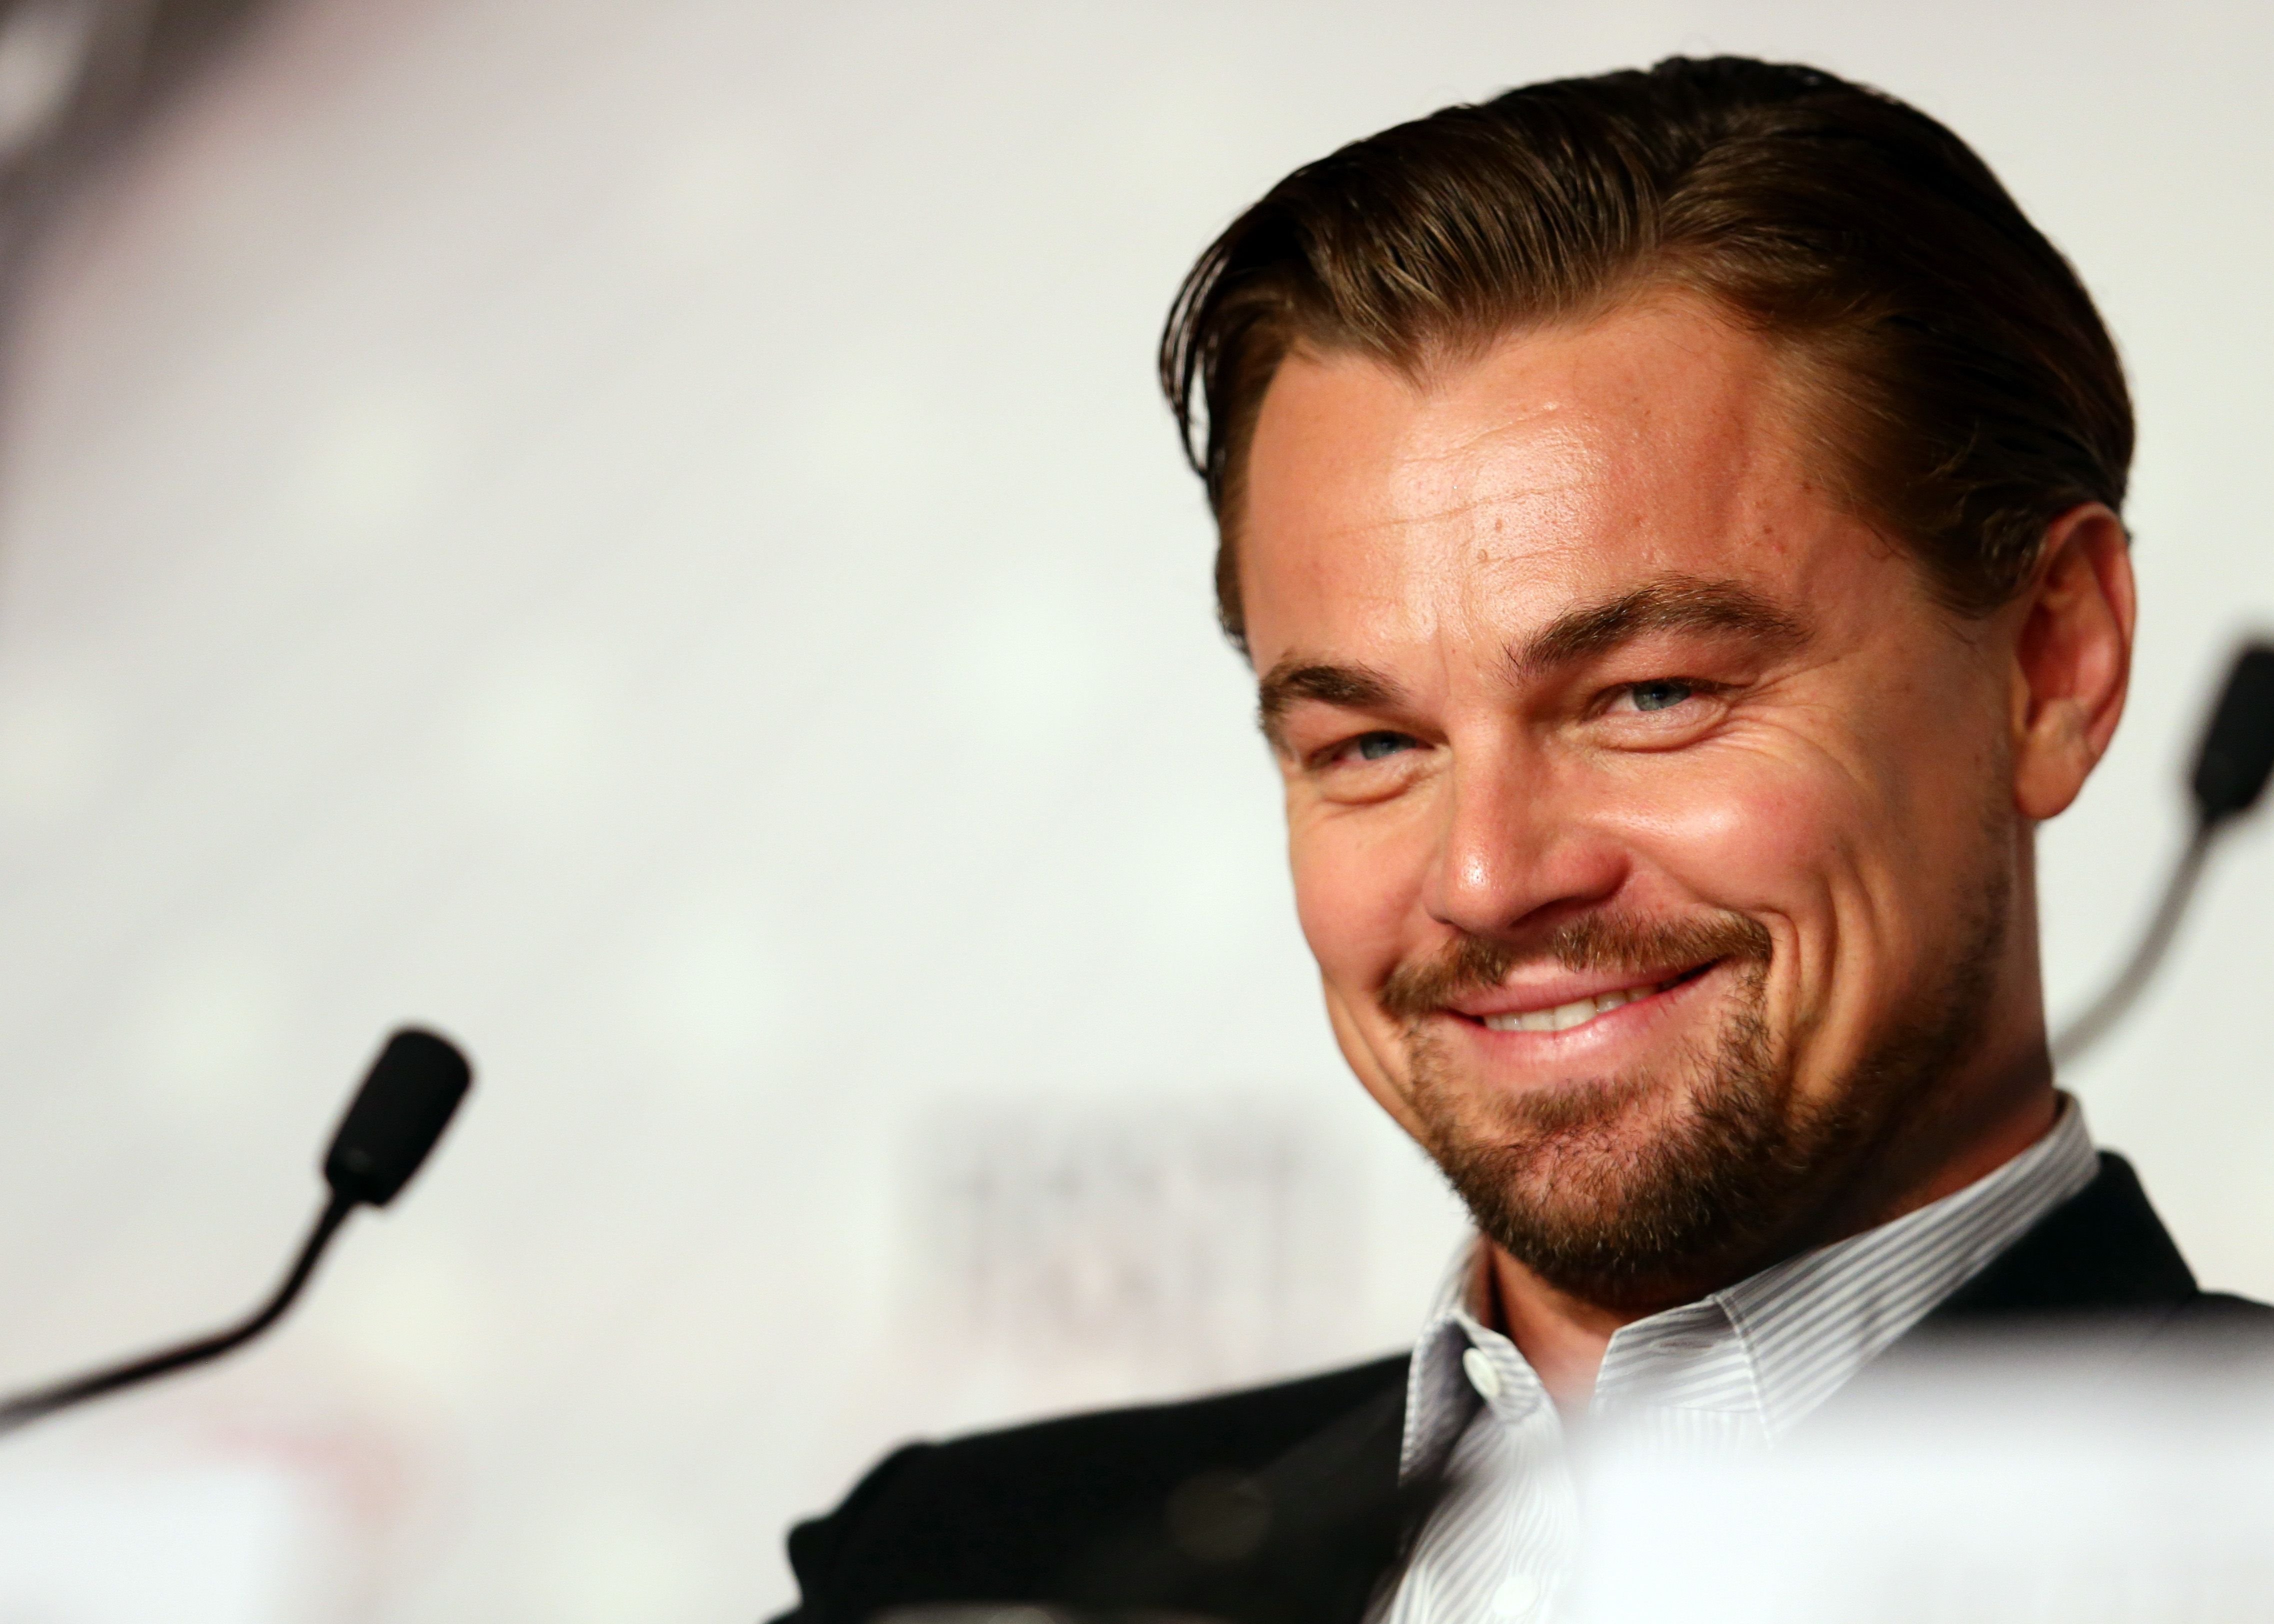 Leonardo DiCaprio at the "The Great Gatsby" press conference at the Cannes Film Festival in 2013 in France | Source: Getty Images